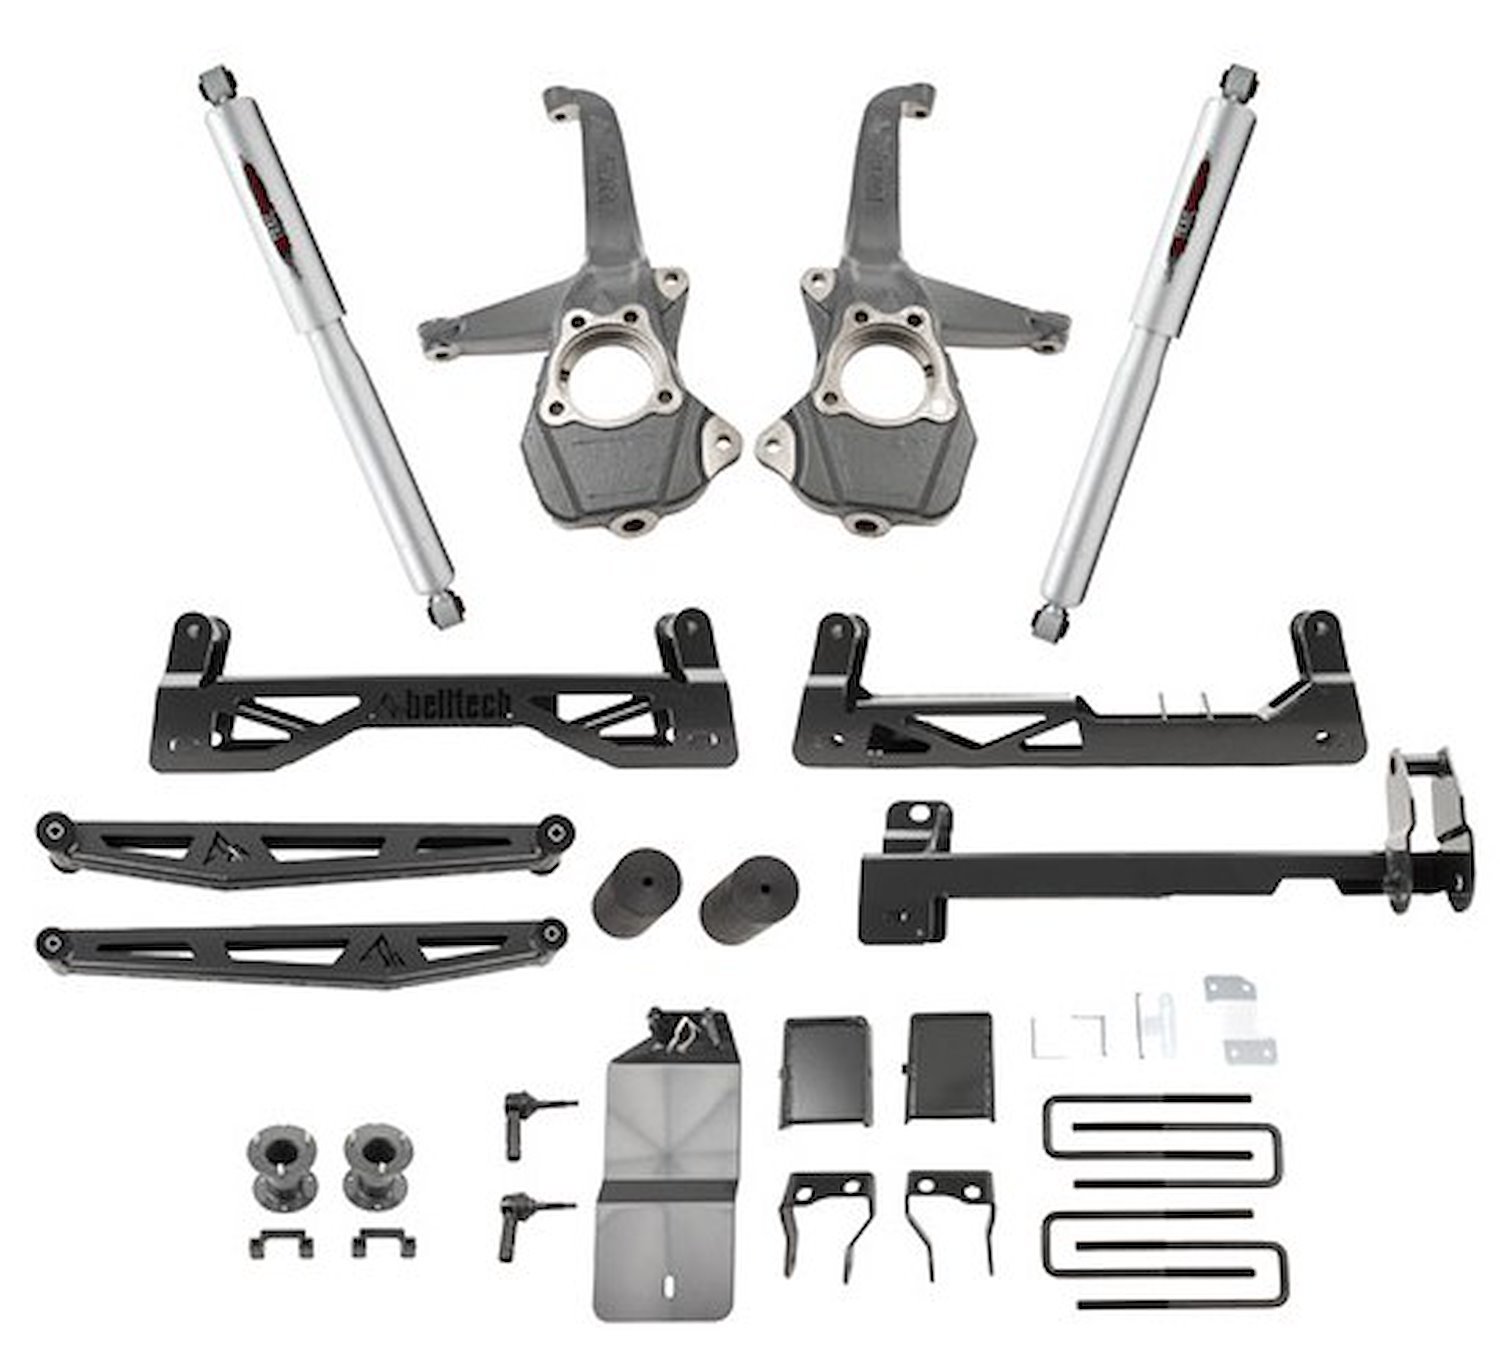 6 in. Suspension Lift Kit for Select Late Model Chevy Silverado, GMC Sierra 1500 Truck 4WD/RWD (Double/Crew Cab)